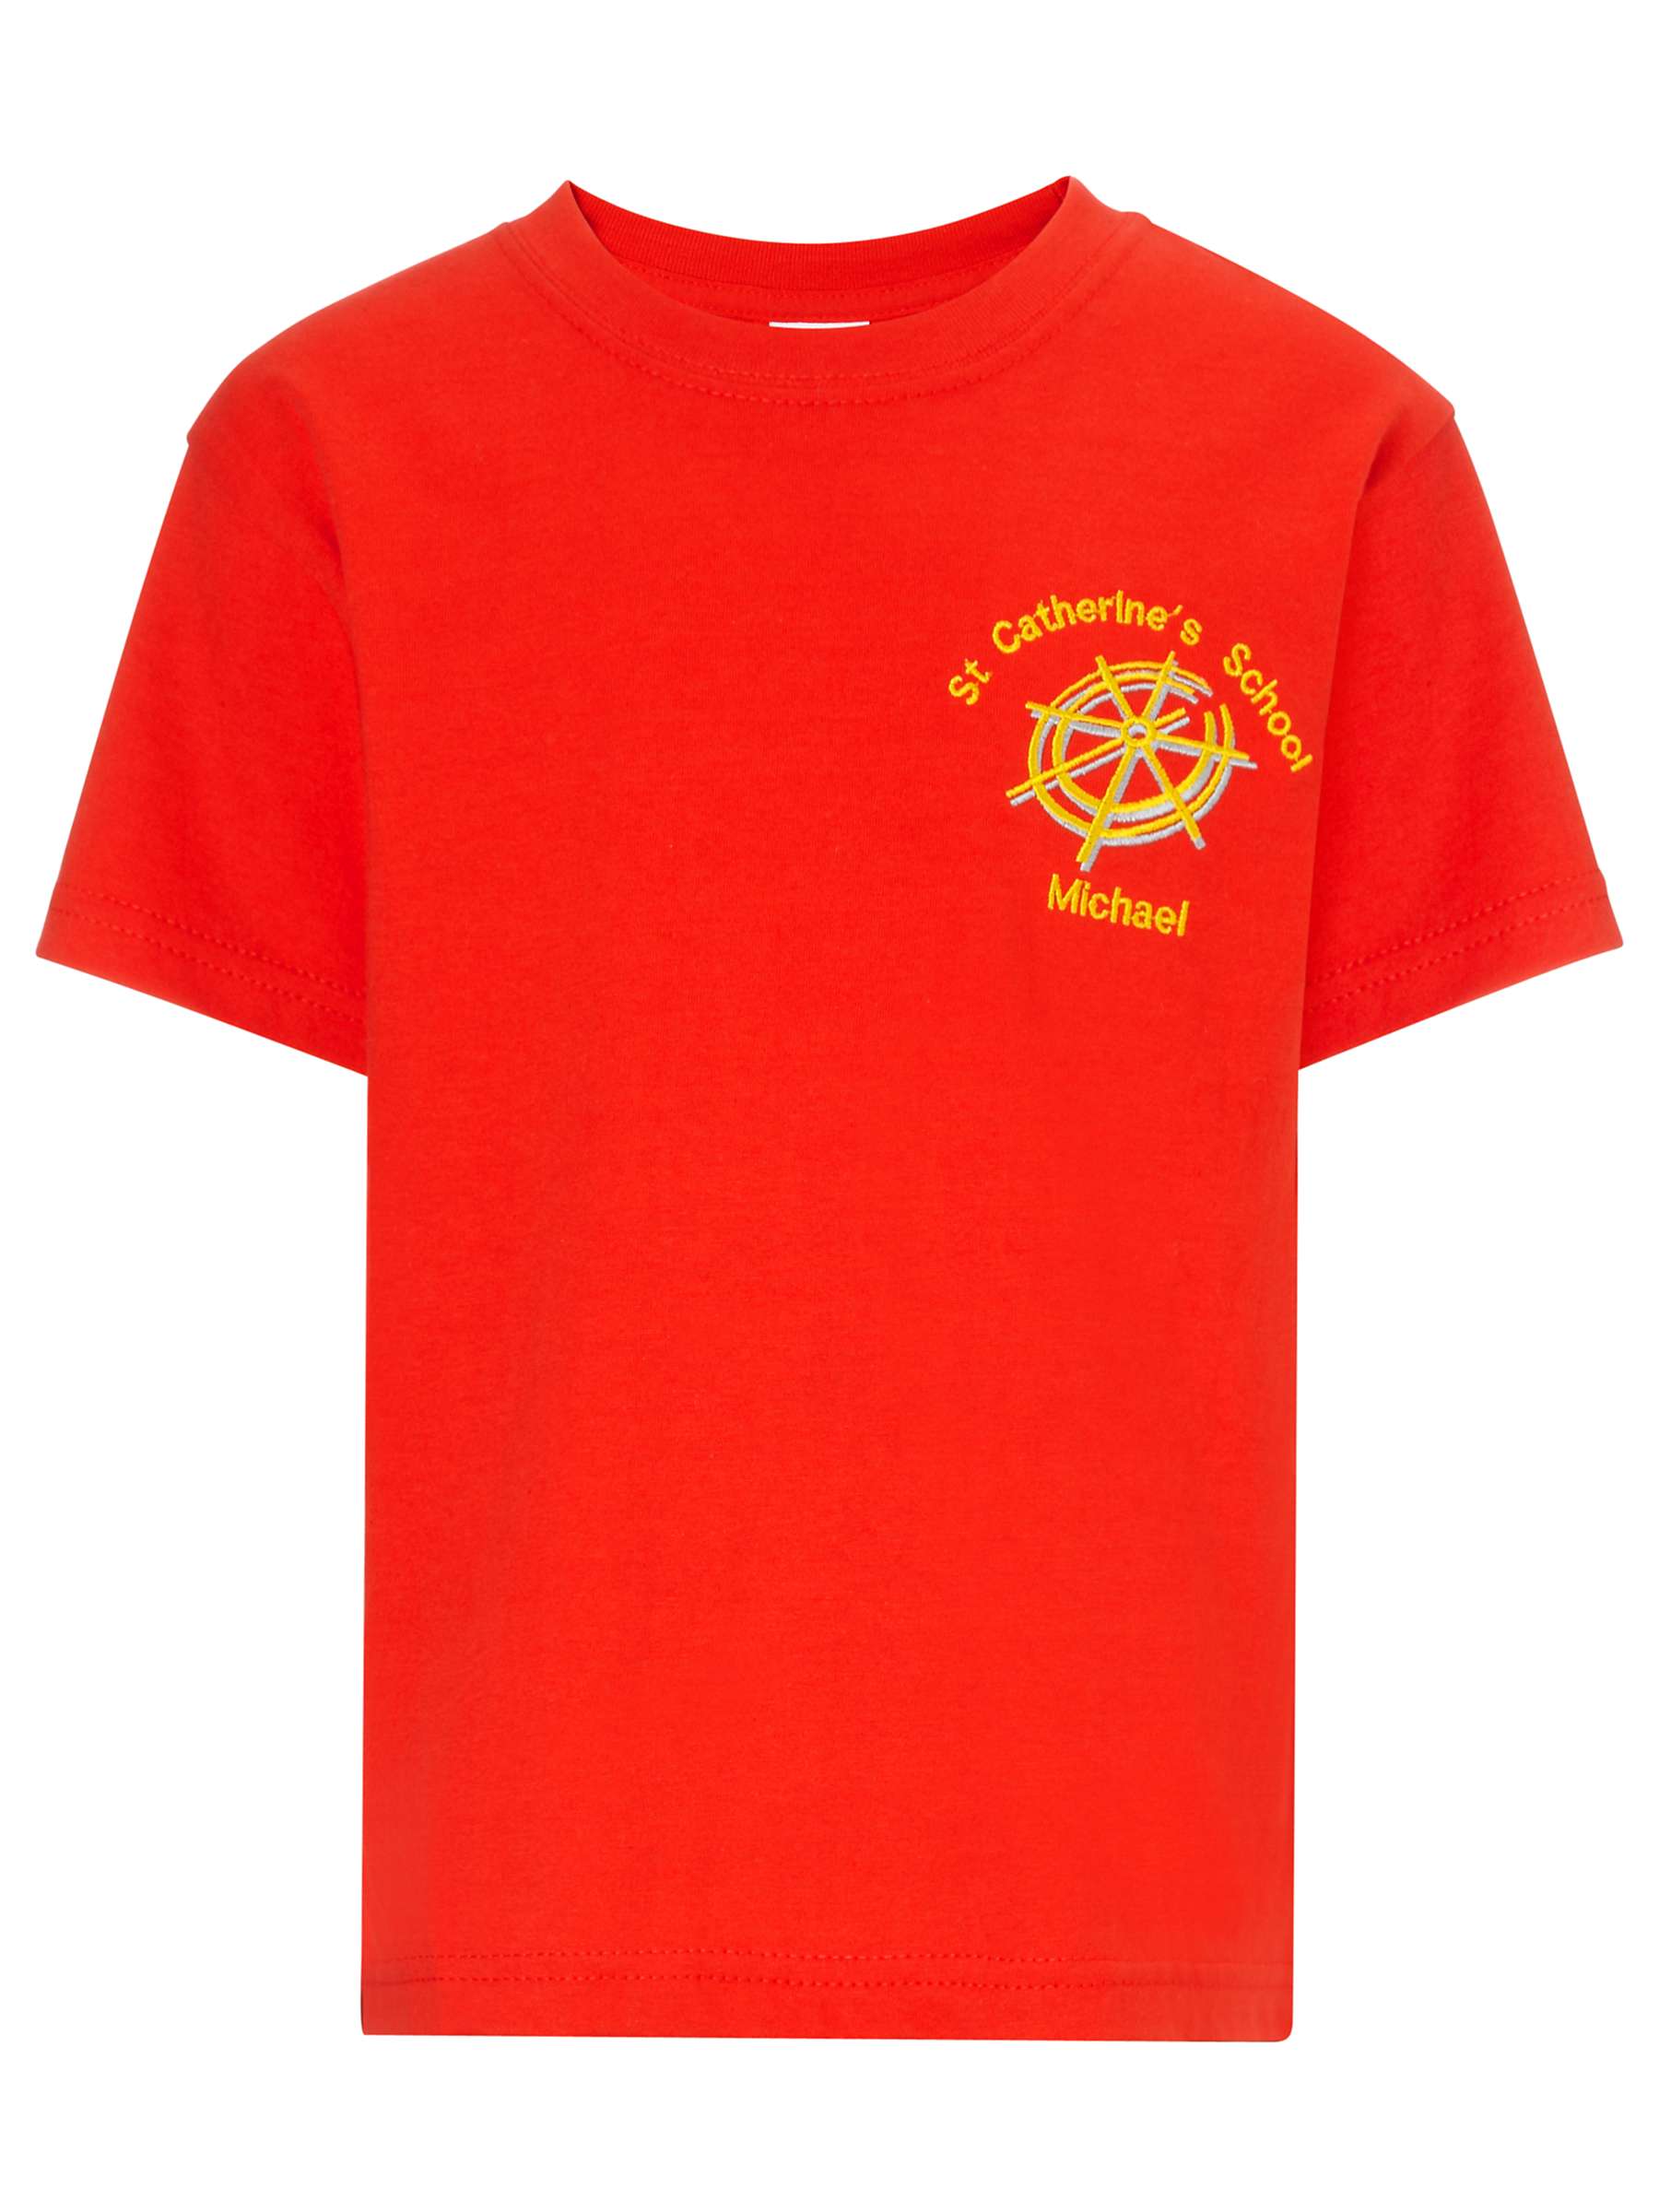 Buy St Catherine's Catholic Primary School Michael House T-Shirt, Red Online at johnlewis.com